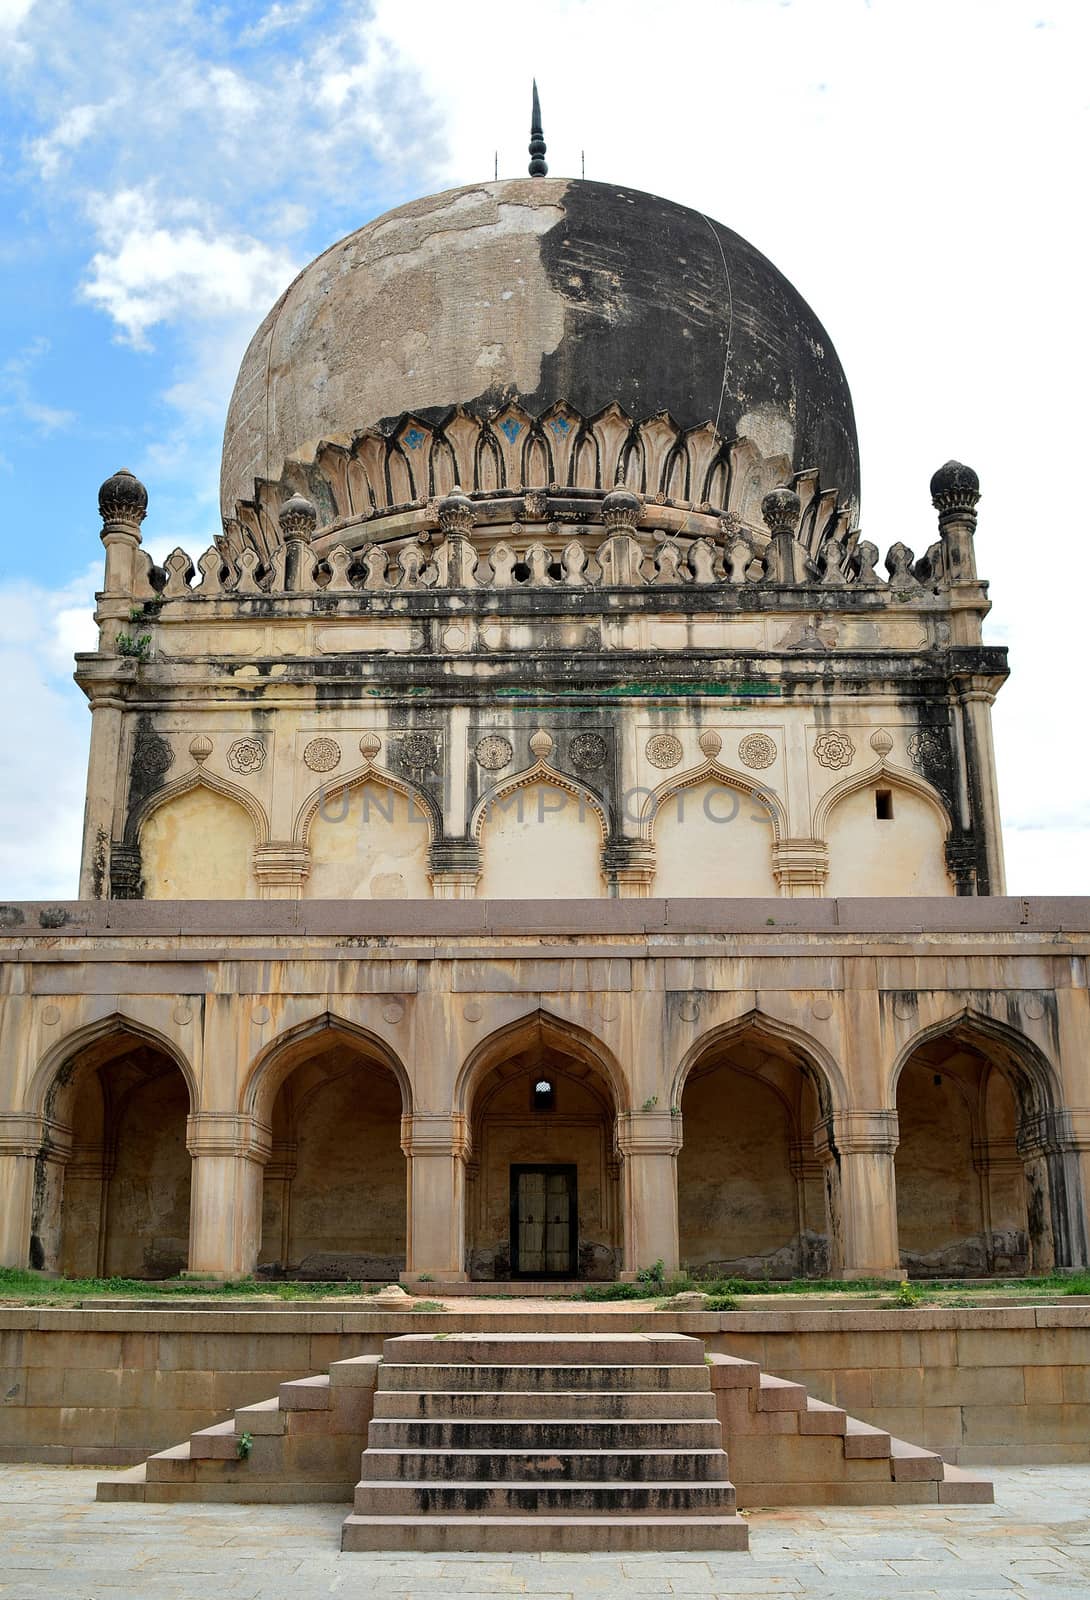 The Qutb Shahi Tombs are located in the Ibrahim Bagh, close to the famous Golconda Fort in Hyderabad, India. They contain the tombs and mosques built by the various kings of the Qutb Shahi dynasty.